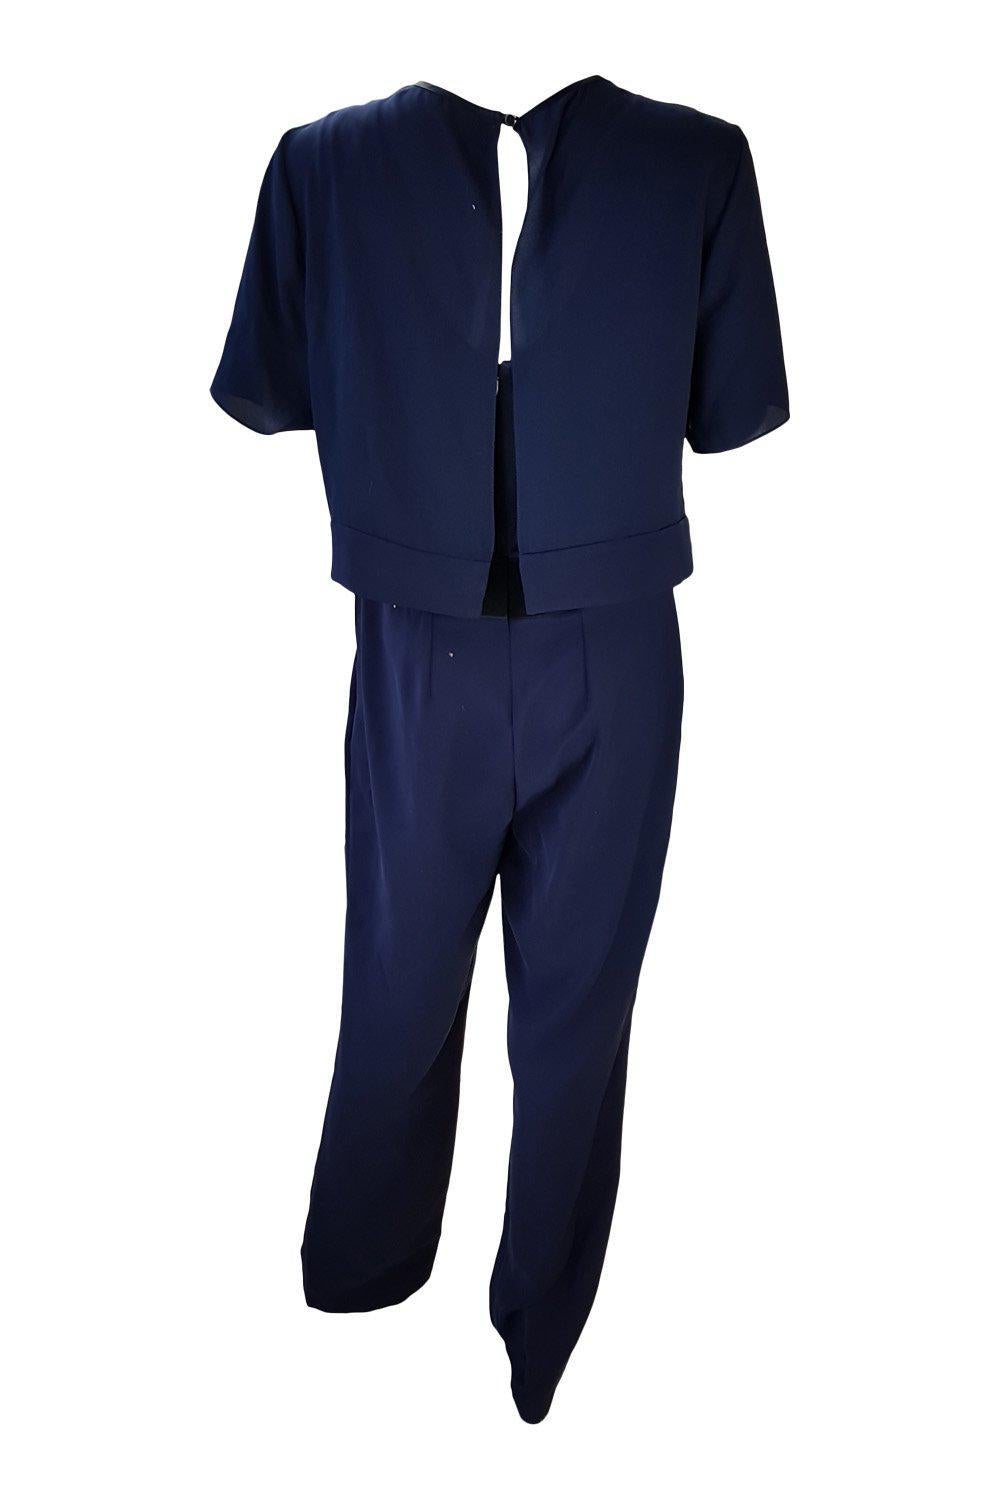 DAMSEL IN A DRESS Blue Jumpsuit and Blouse Set (UK 12)-Damsel In A Dress-The Freperie